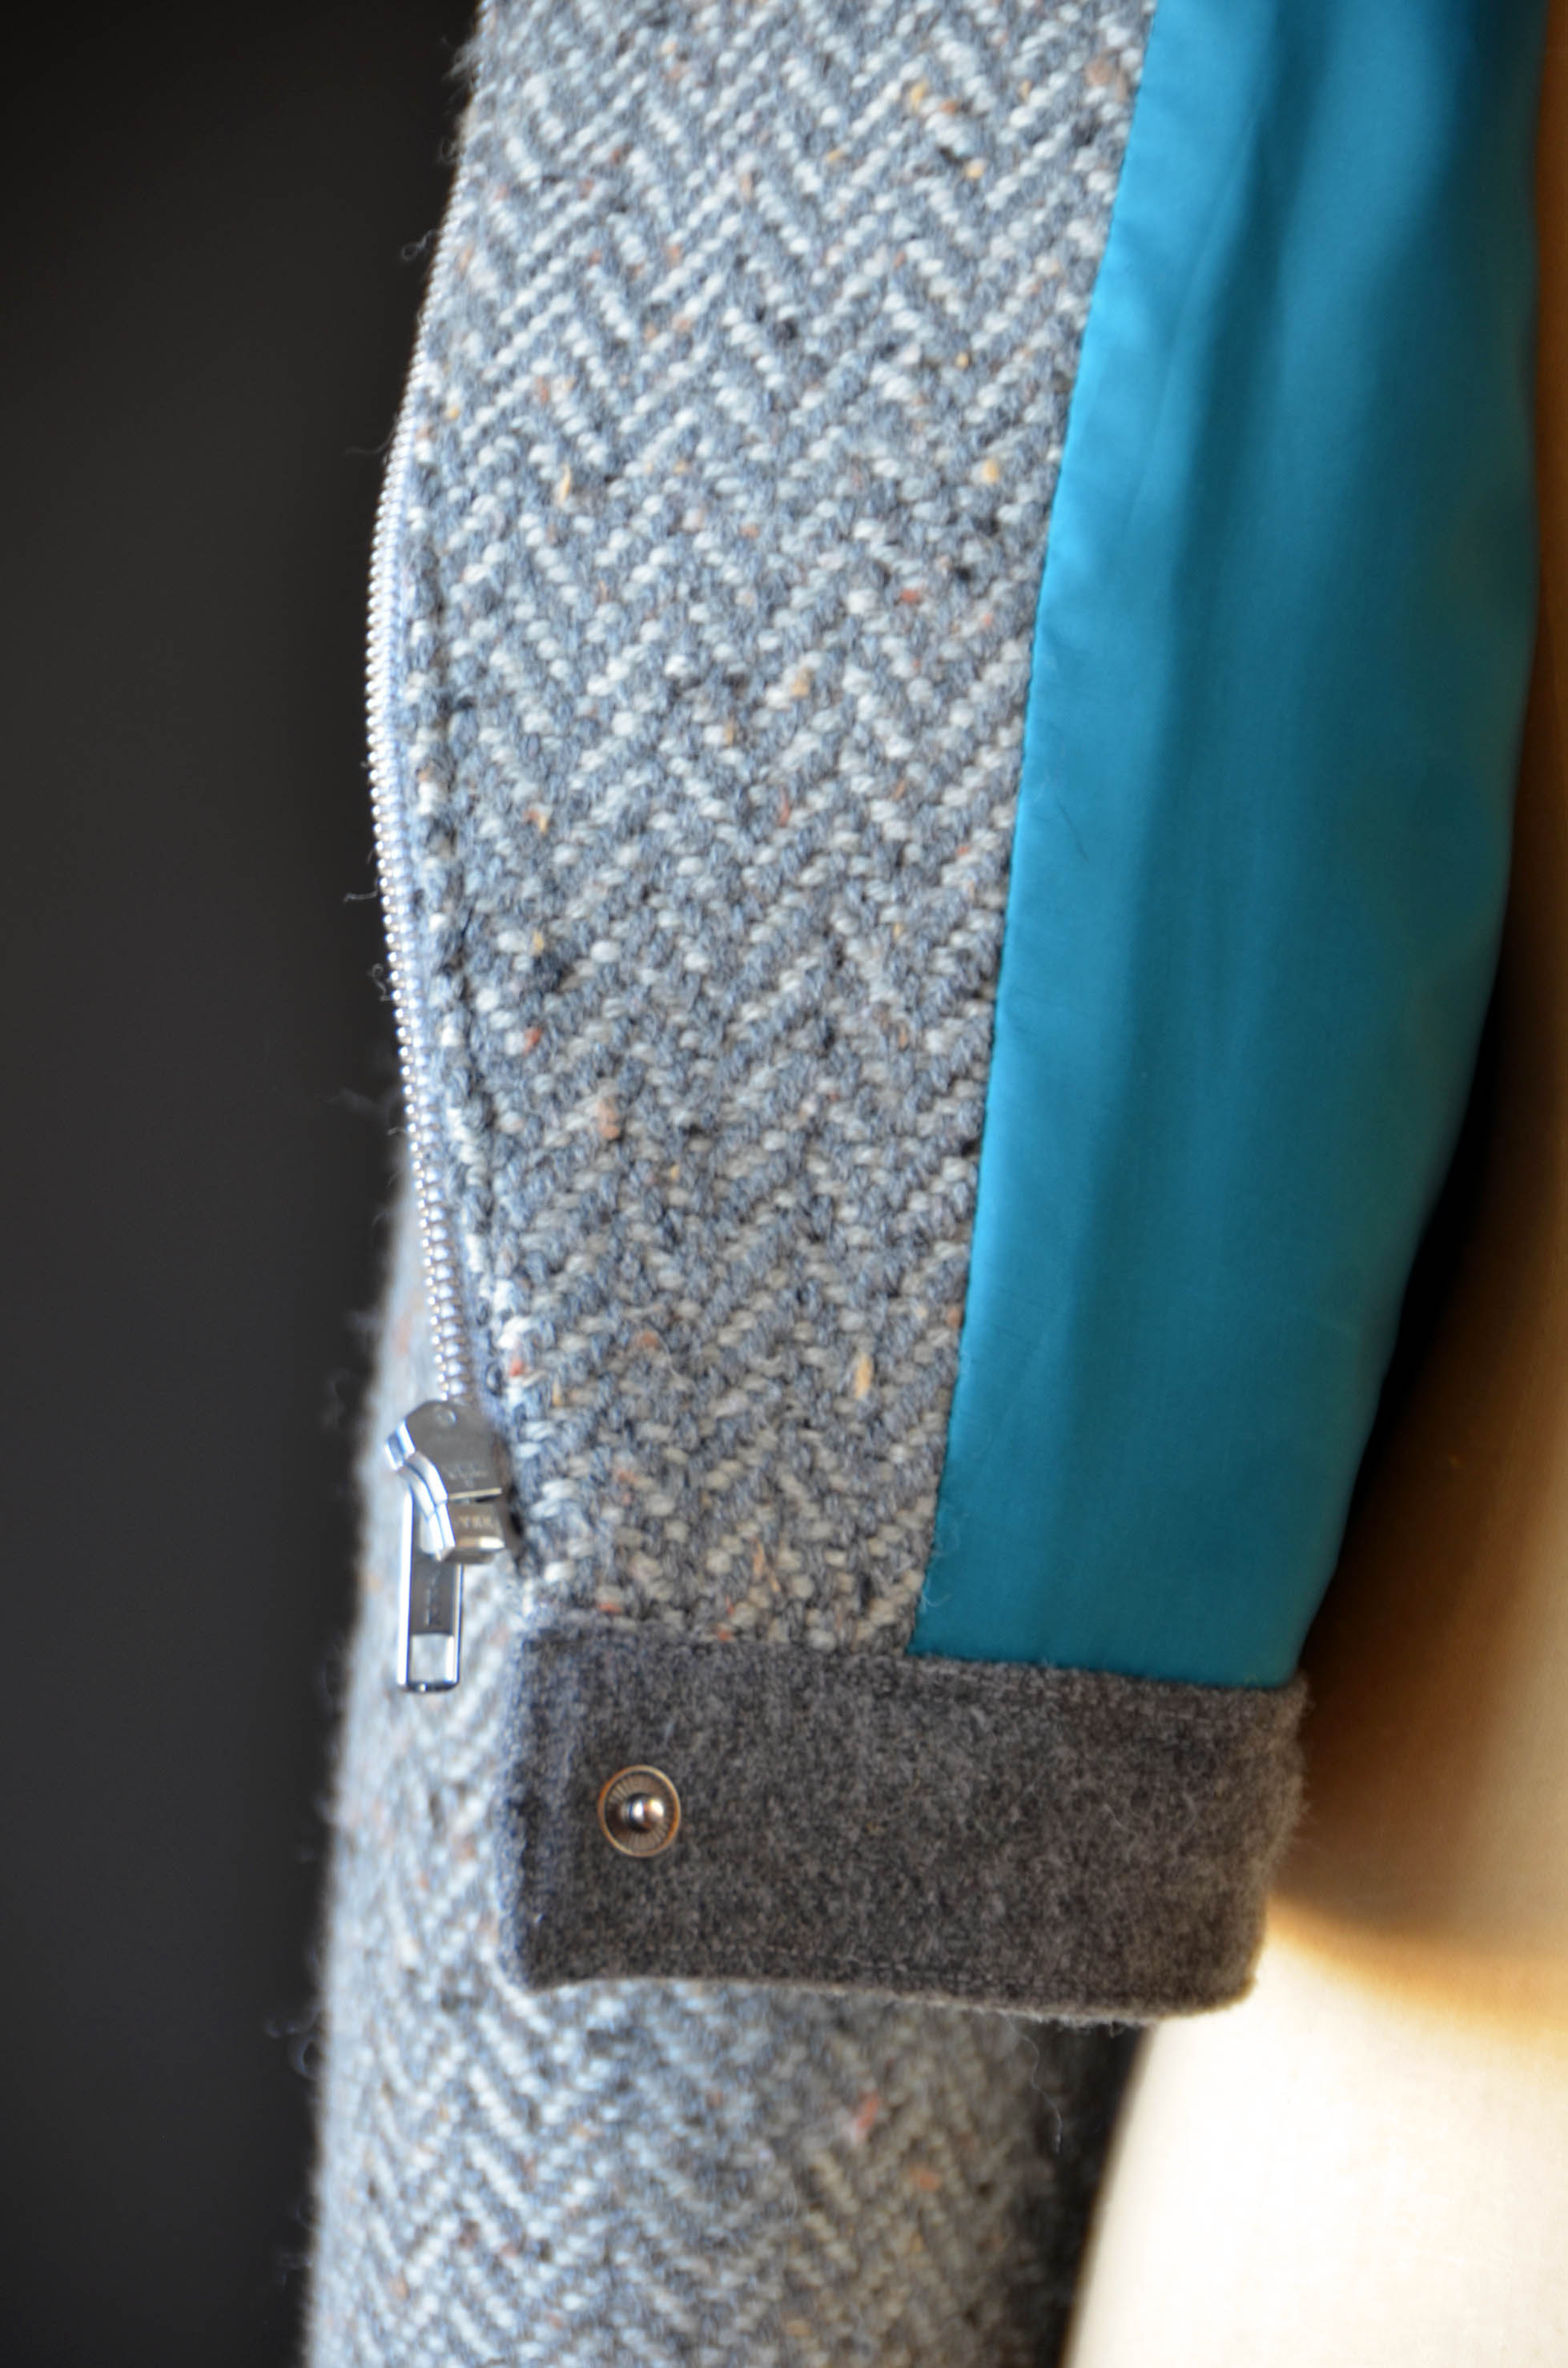 My pop of color is on the inside of my jacket in the form of teal lining. Mmmm.